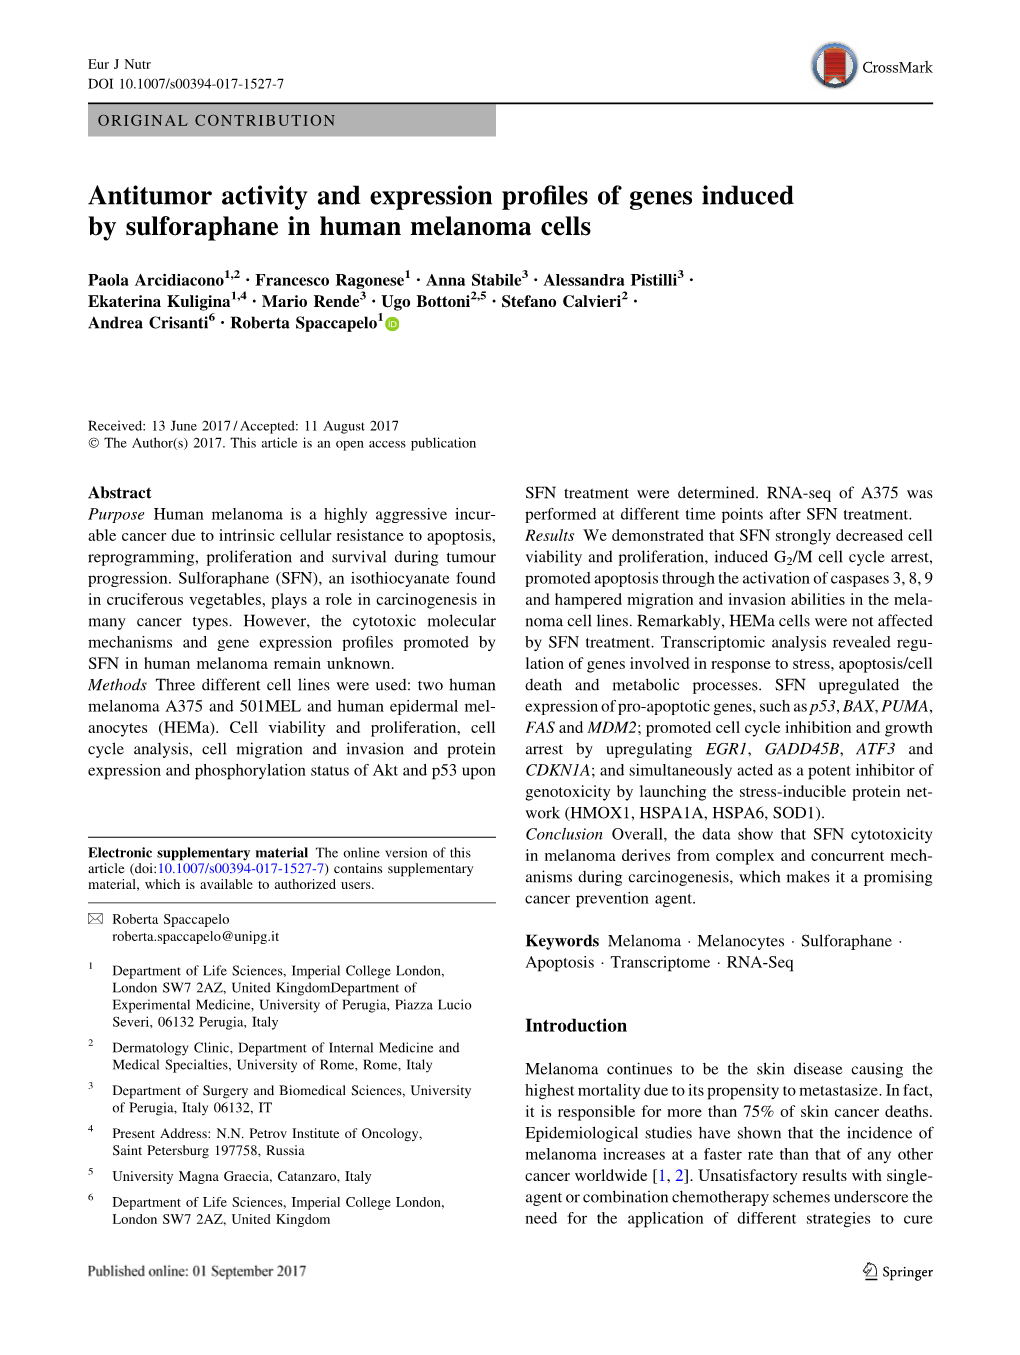 Antitumor Activity and Expression Profiles of Genes Induced by Sulforaphane in Human Melanoma Cells